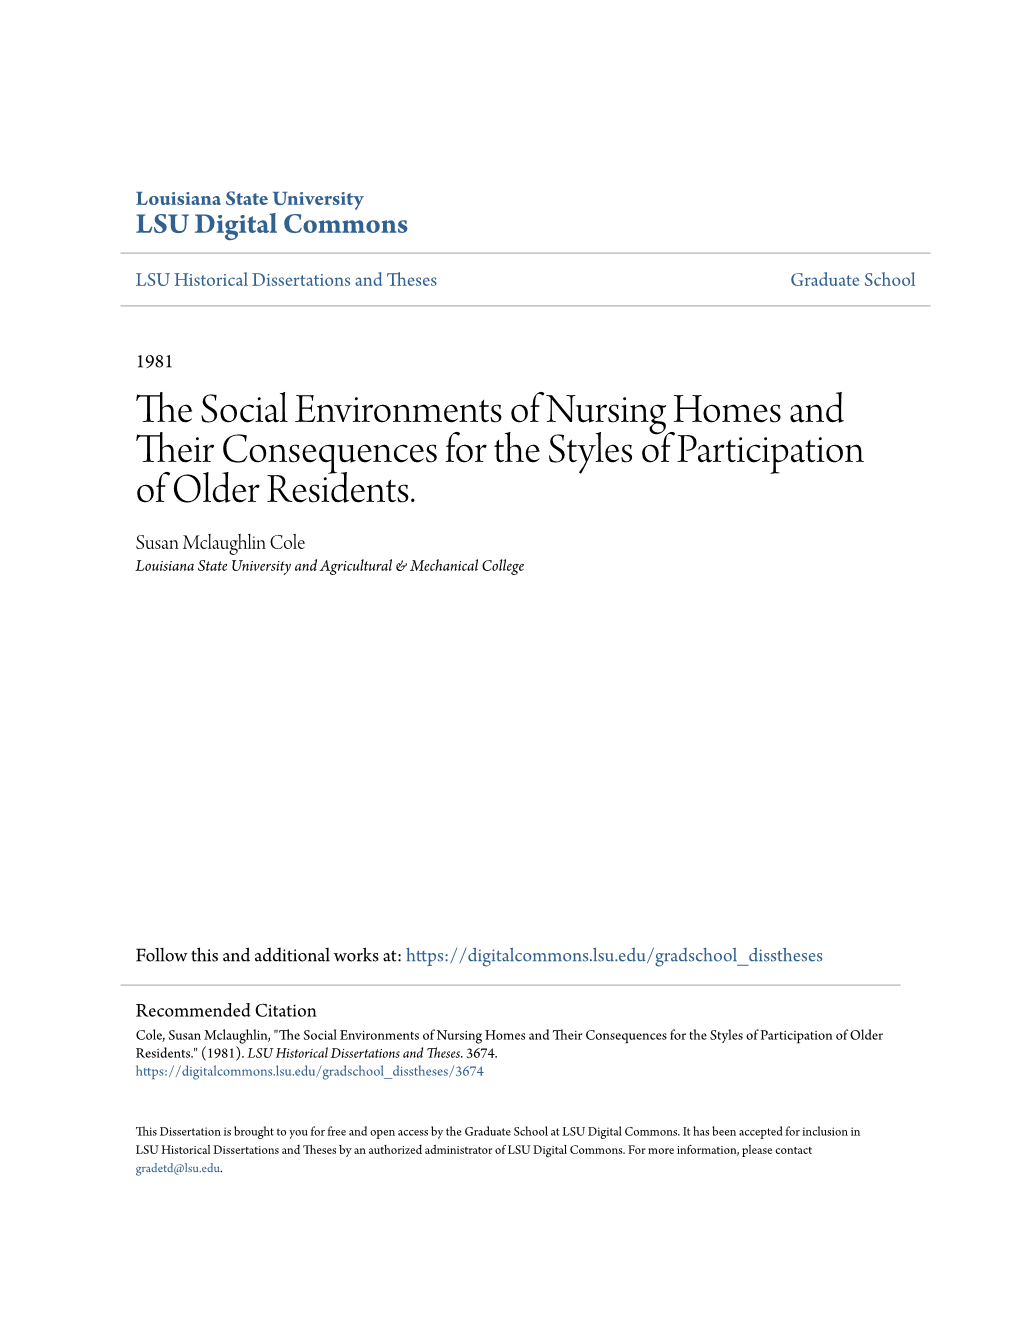 The Social Environments of Nursing Homes and Their Consequences for the Styles of Participation of Older Residents